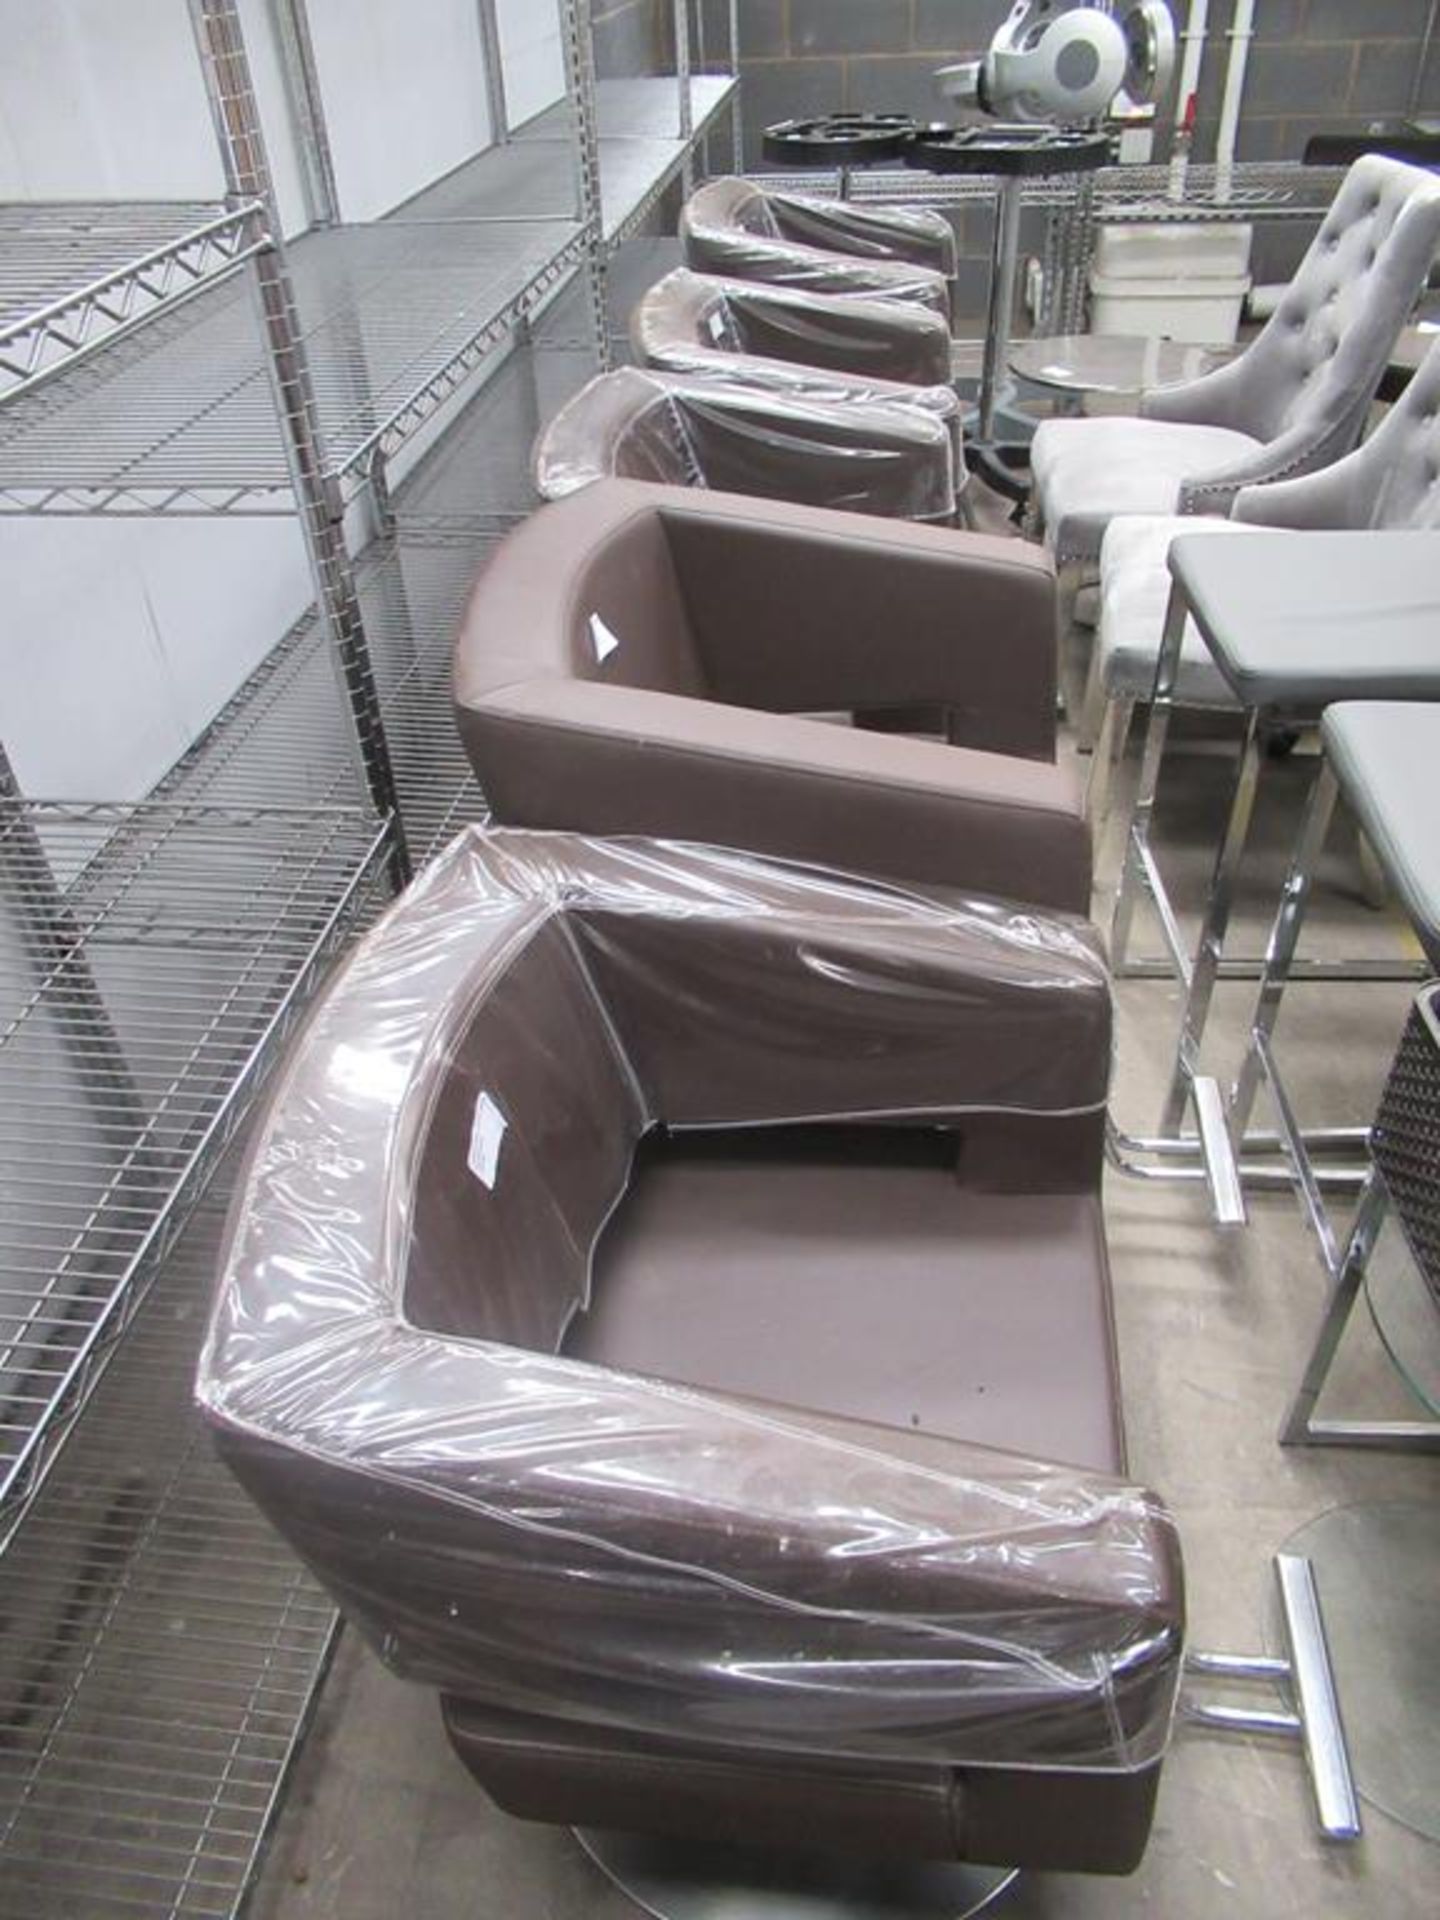 6 x brown leather effect salon chairs - Image 2 of 2